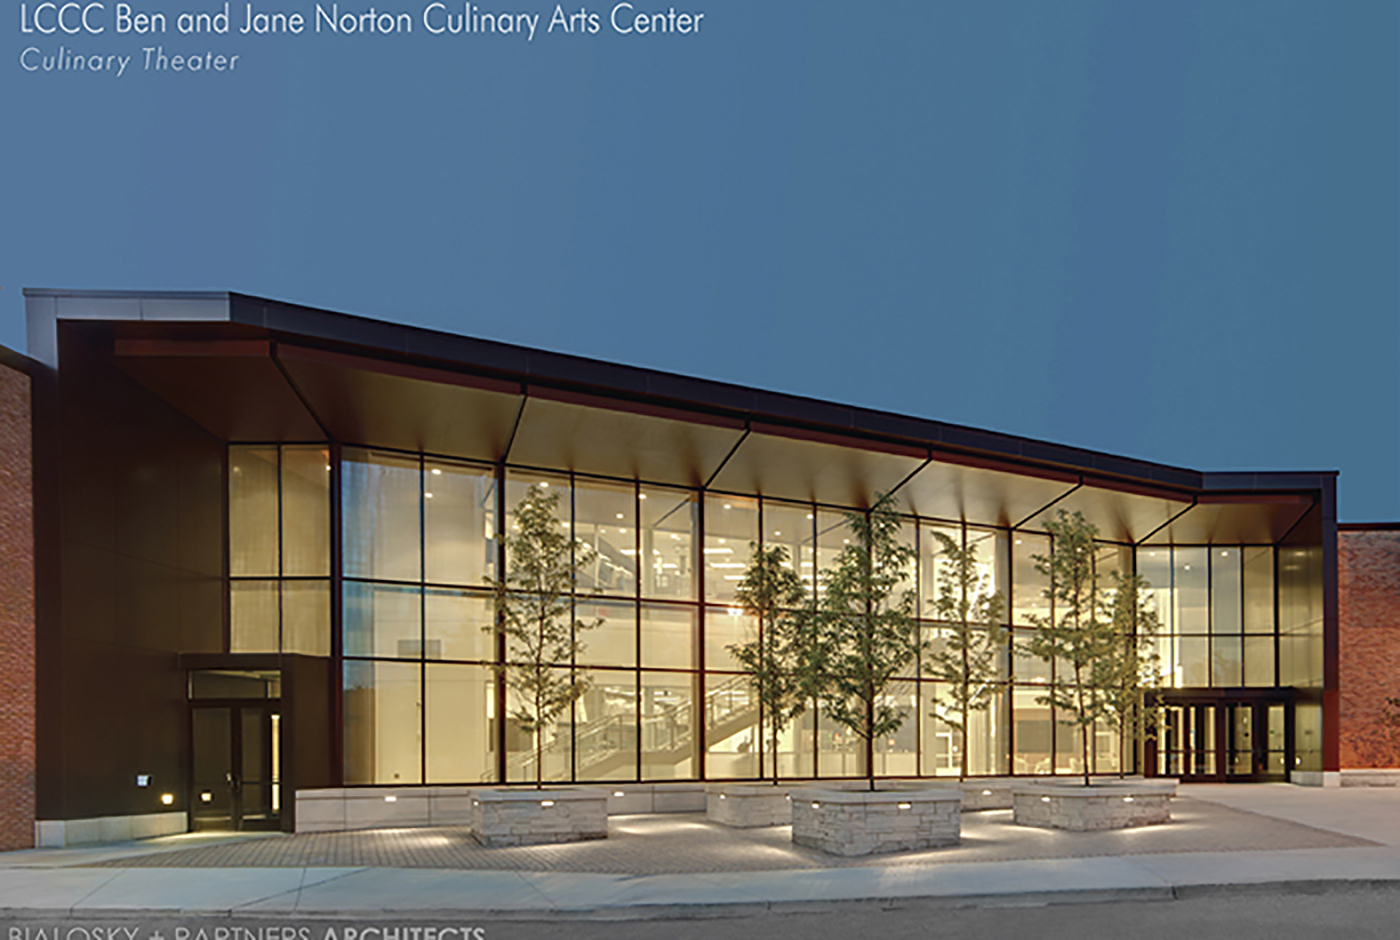 LCCC Ben and Jane Norton Culinary Arts Center | Elyria, OH | Bialosky | AIA Cleveland Design Merit Award